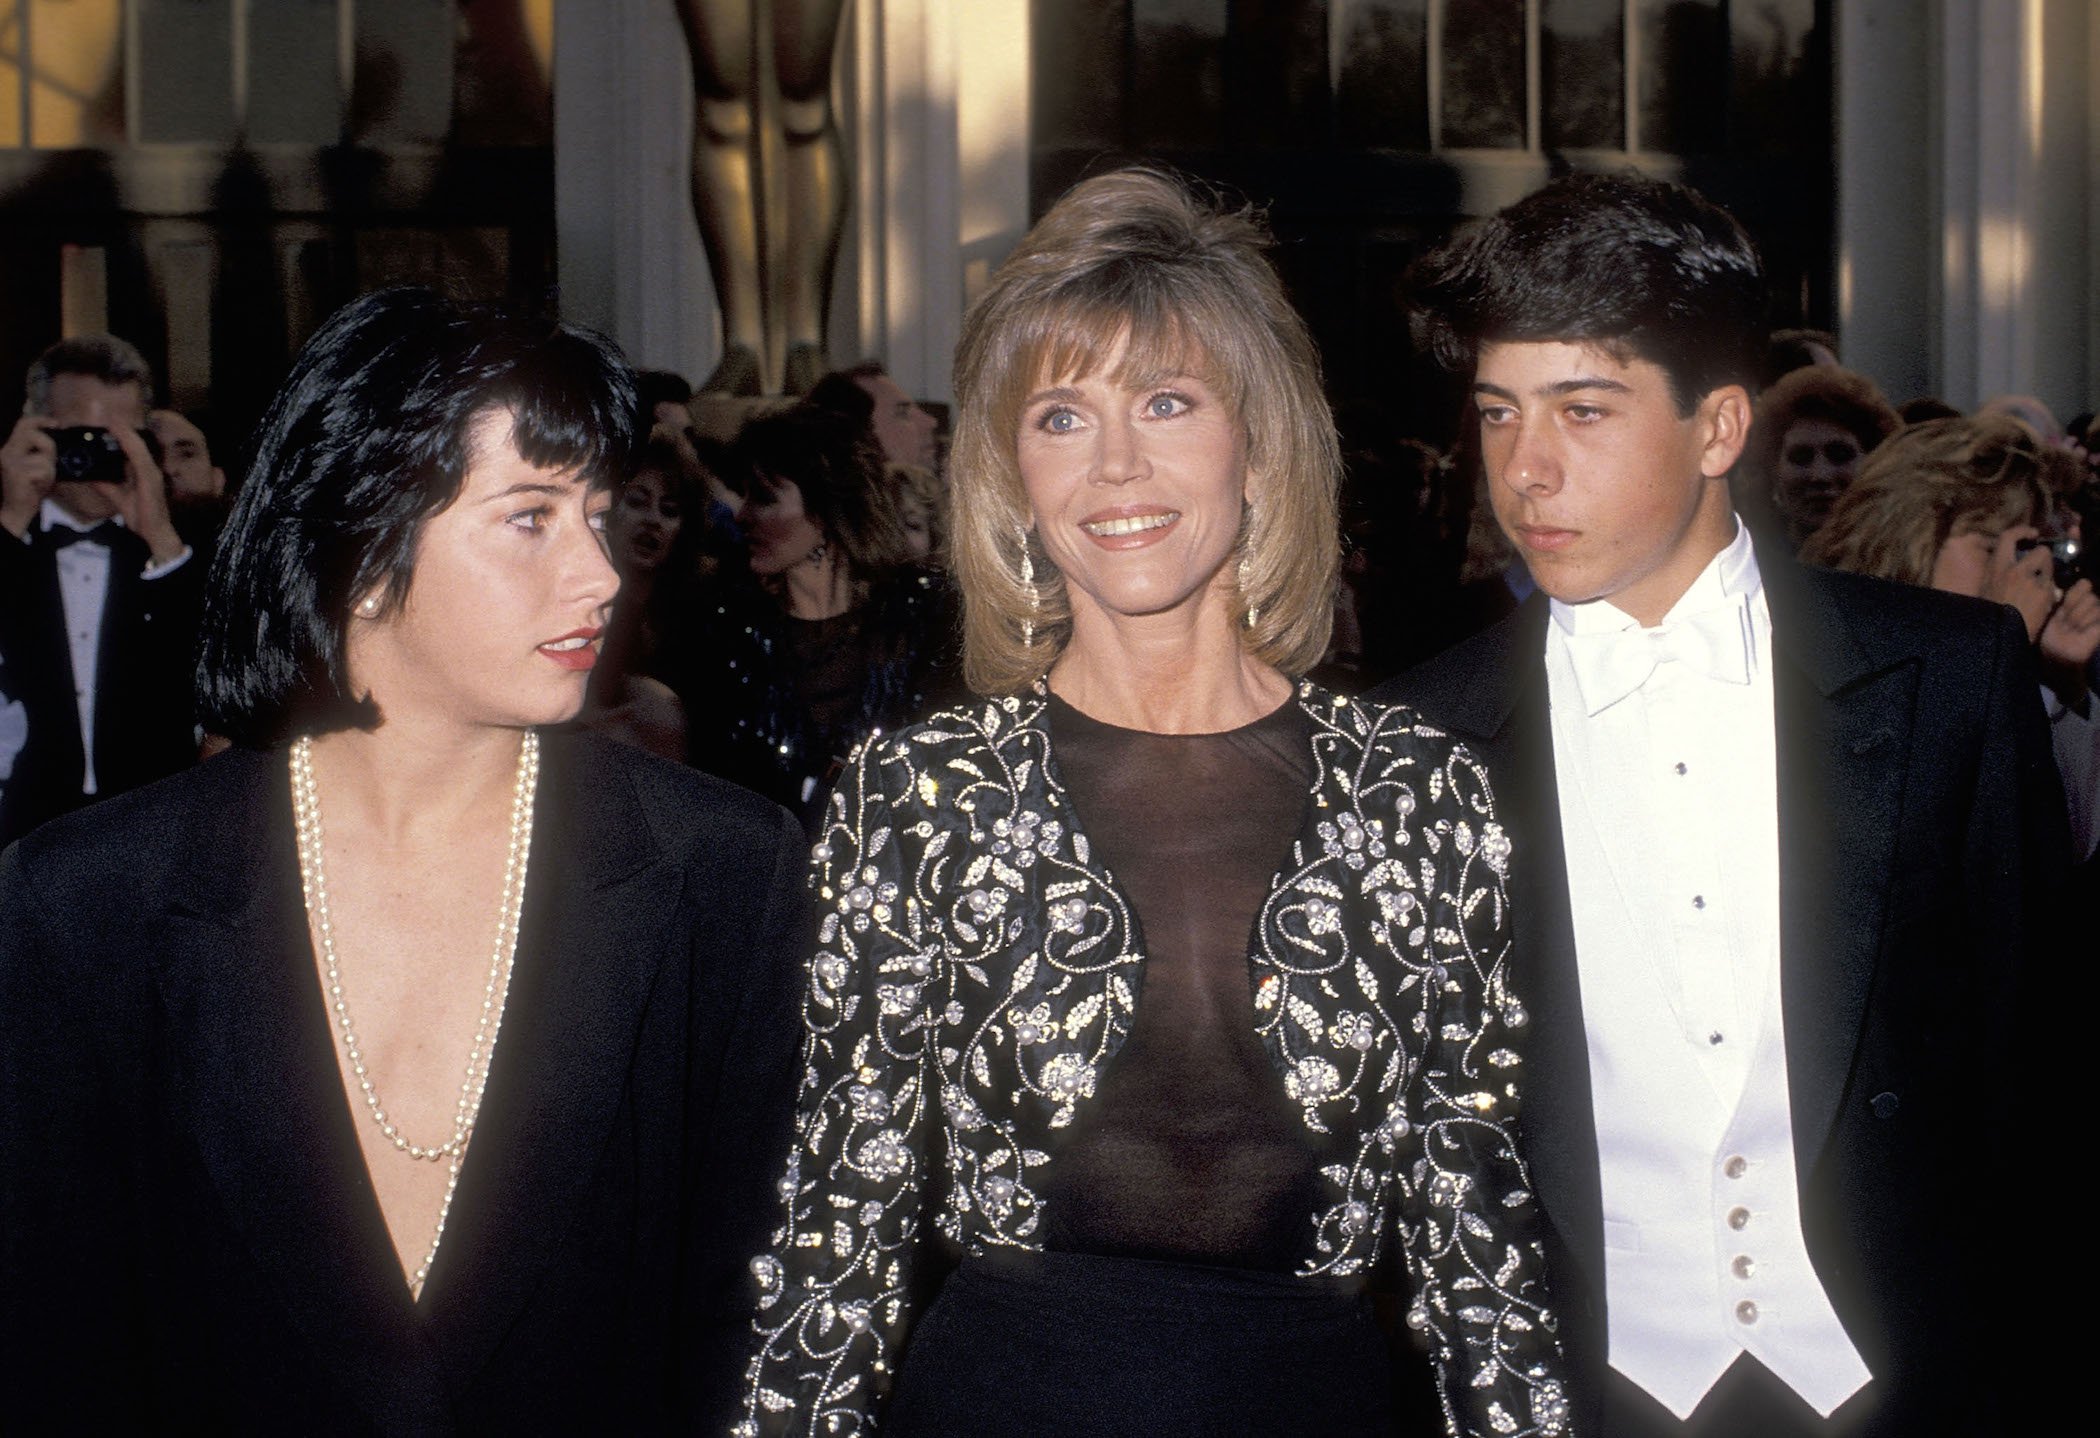 Jane Fonda's children, daughter Vanessa Vadim and son Troy Garity, with her at an event